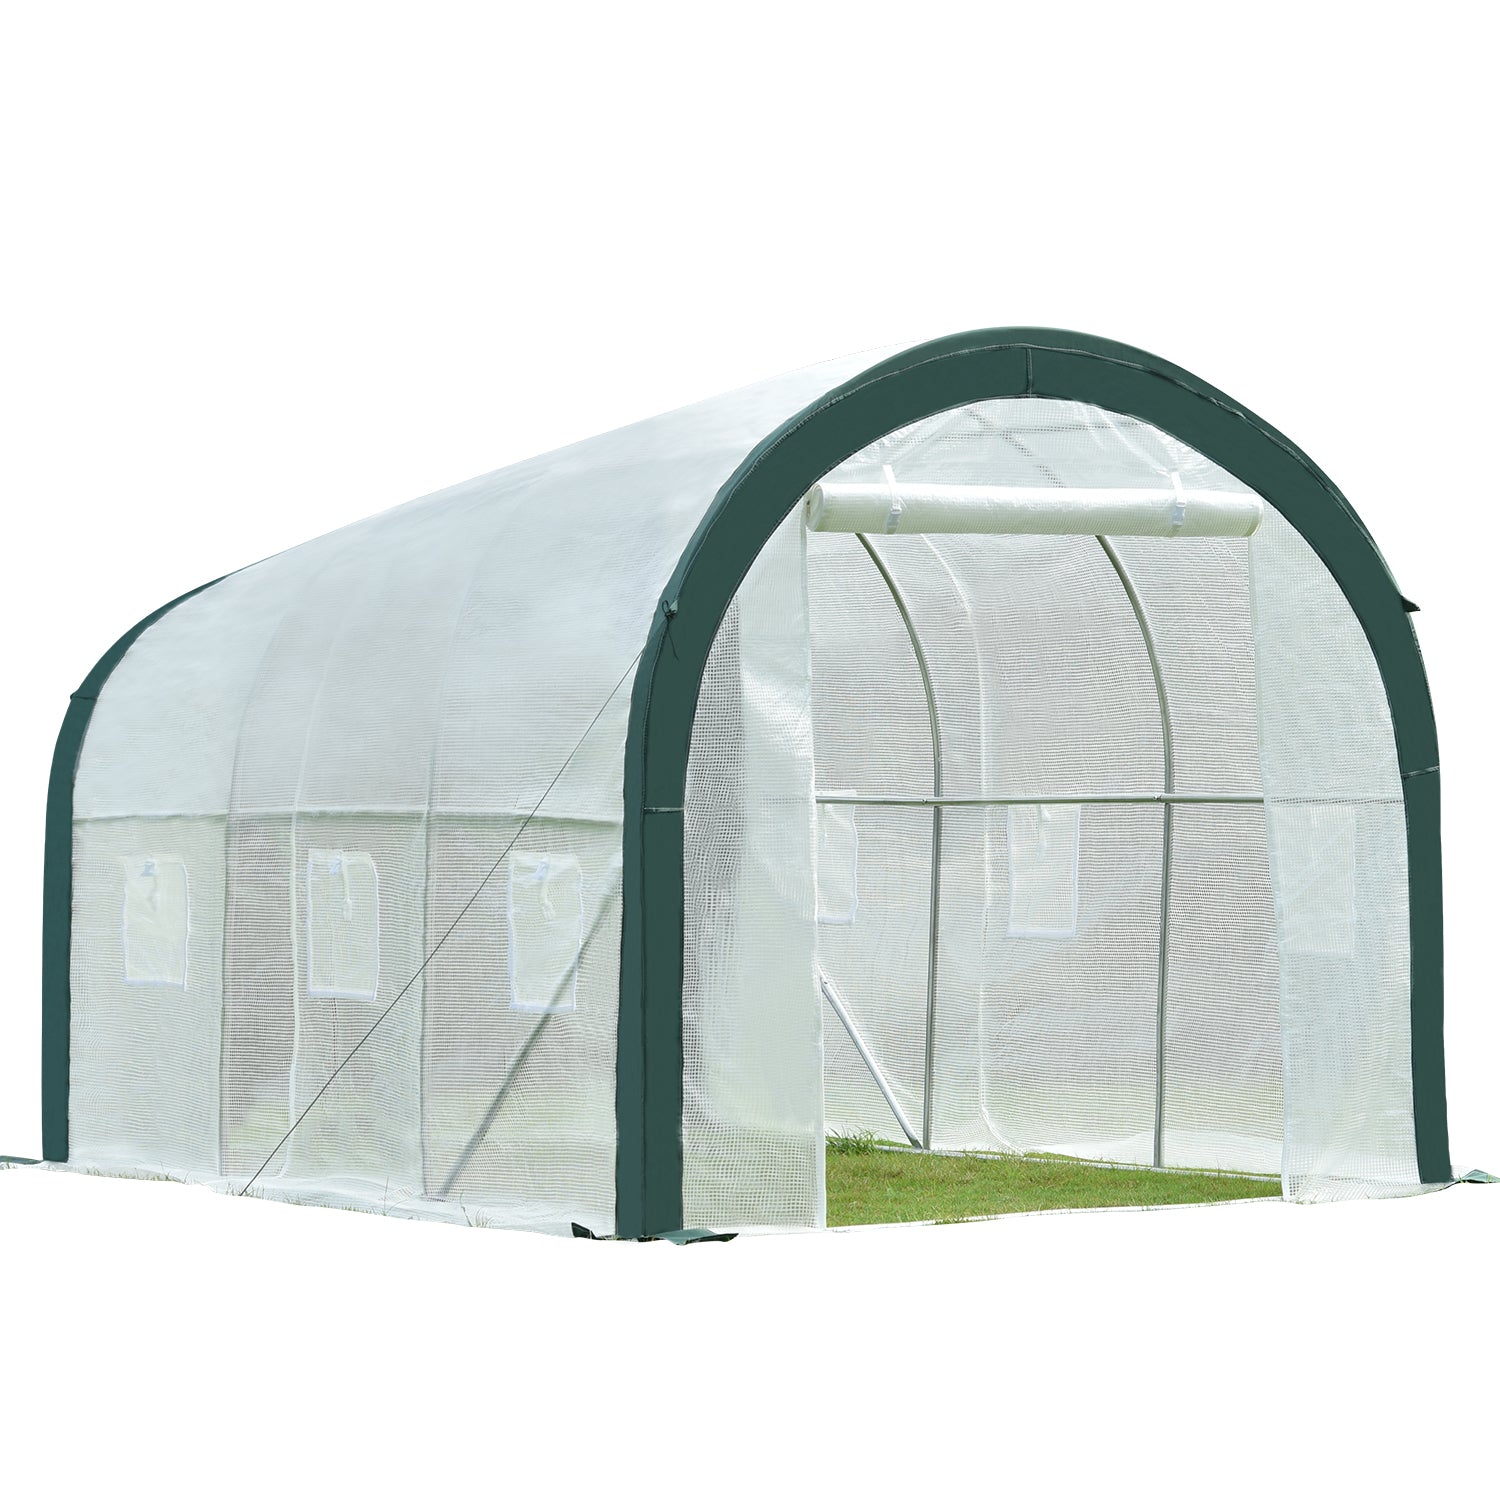 12 ft. x 7 ft. x 7 ft. Walk-in Tunnel Greenhouse Patio Greenhouse Heavy Duty Frame with 2 Roll Zipper Door 6 Roll-up Side Windows - Green/White - Aoodor